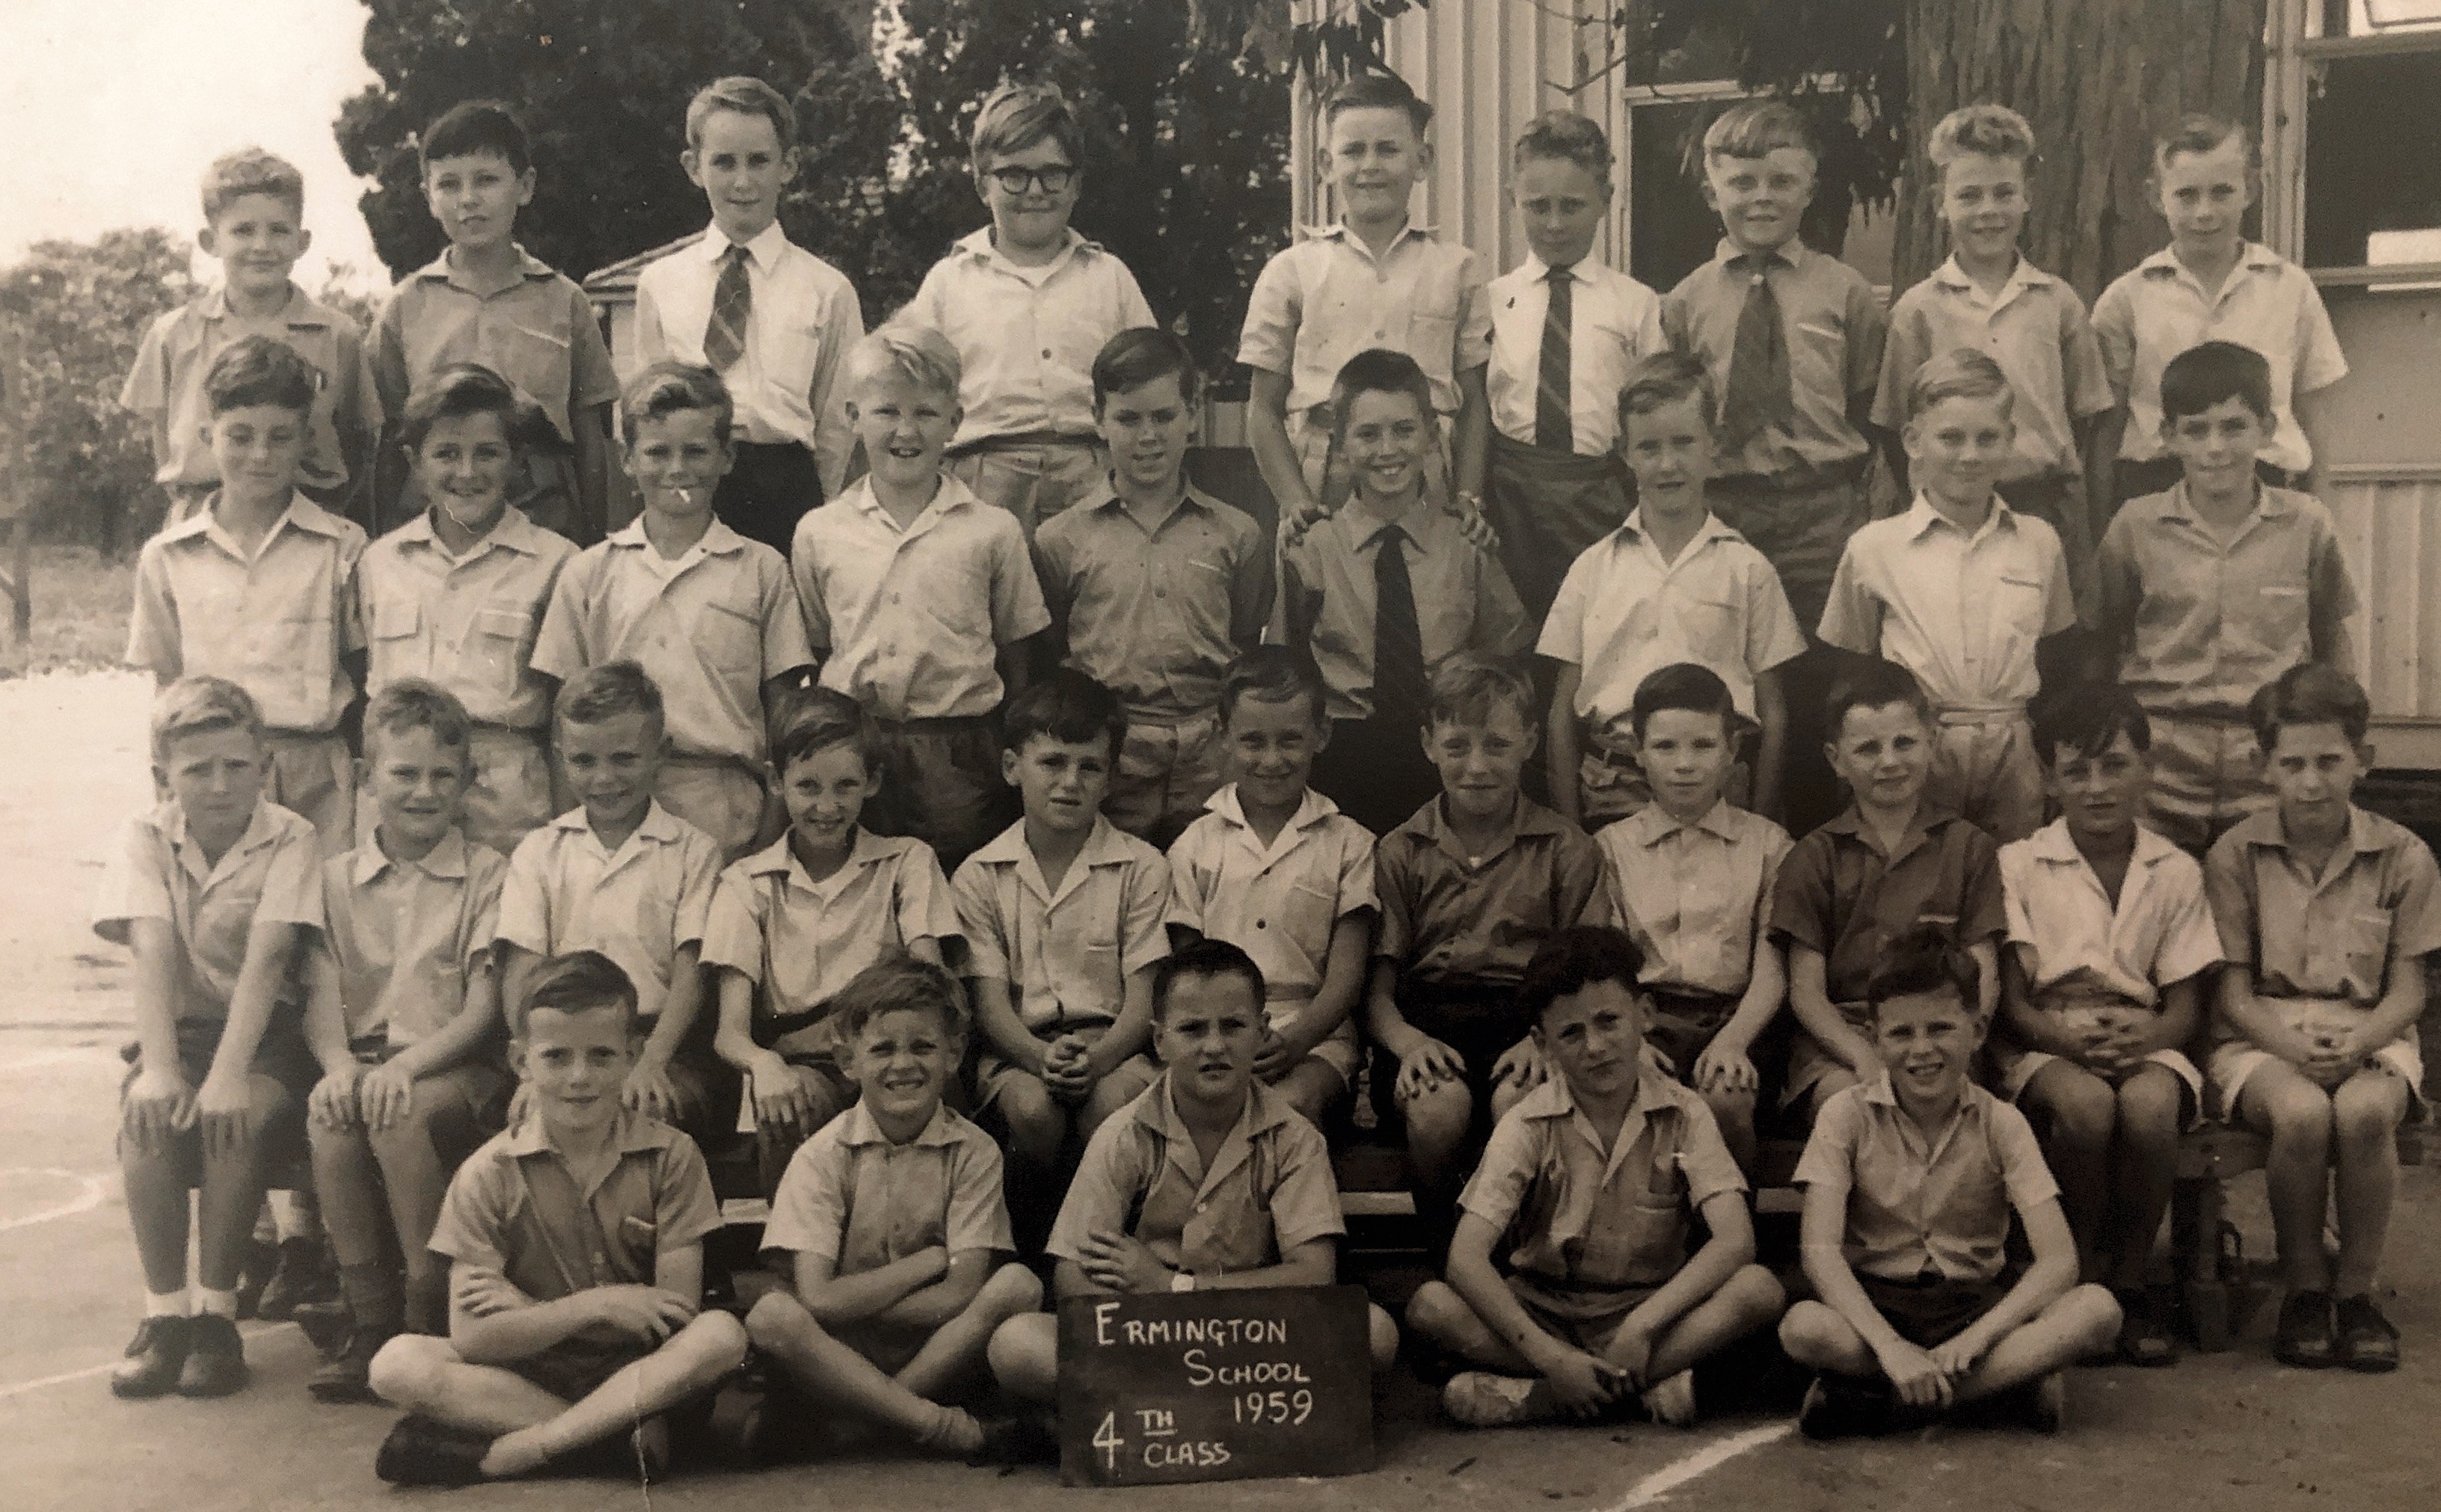 Ermington Public School 4th class 1959. I’m in the second row 3rd from the left.